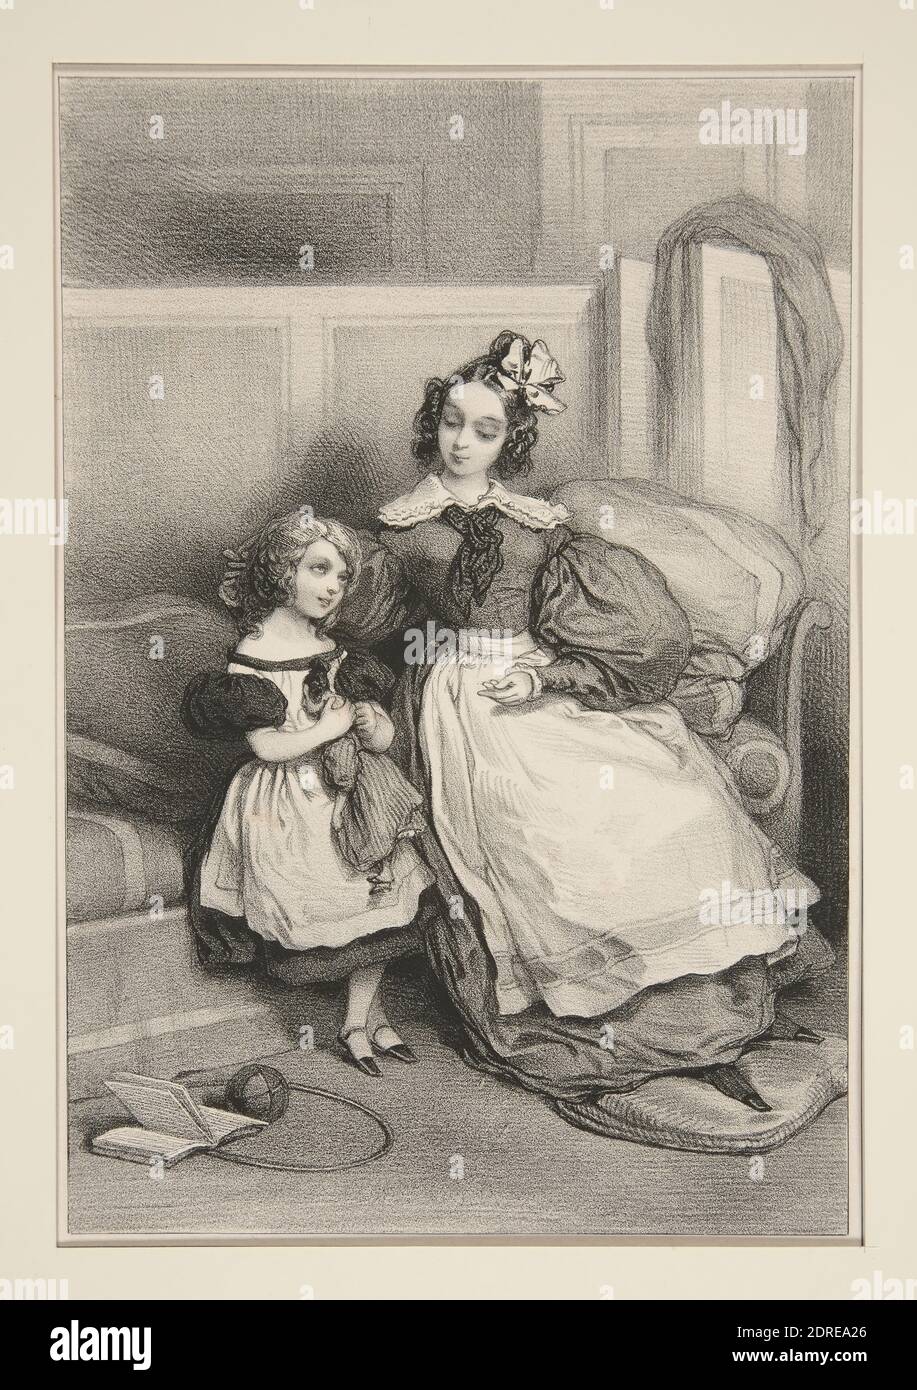 Artist: Paul Gavarni, French, 1804–1866, Deux Soeurs., Lithograph, French, 19th century, Works on Paper - Prints Stock Photo